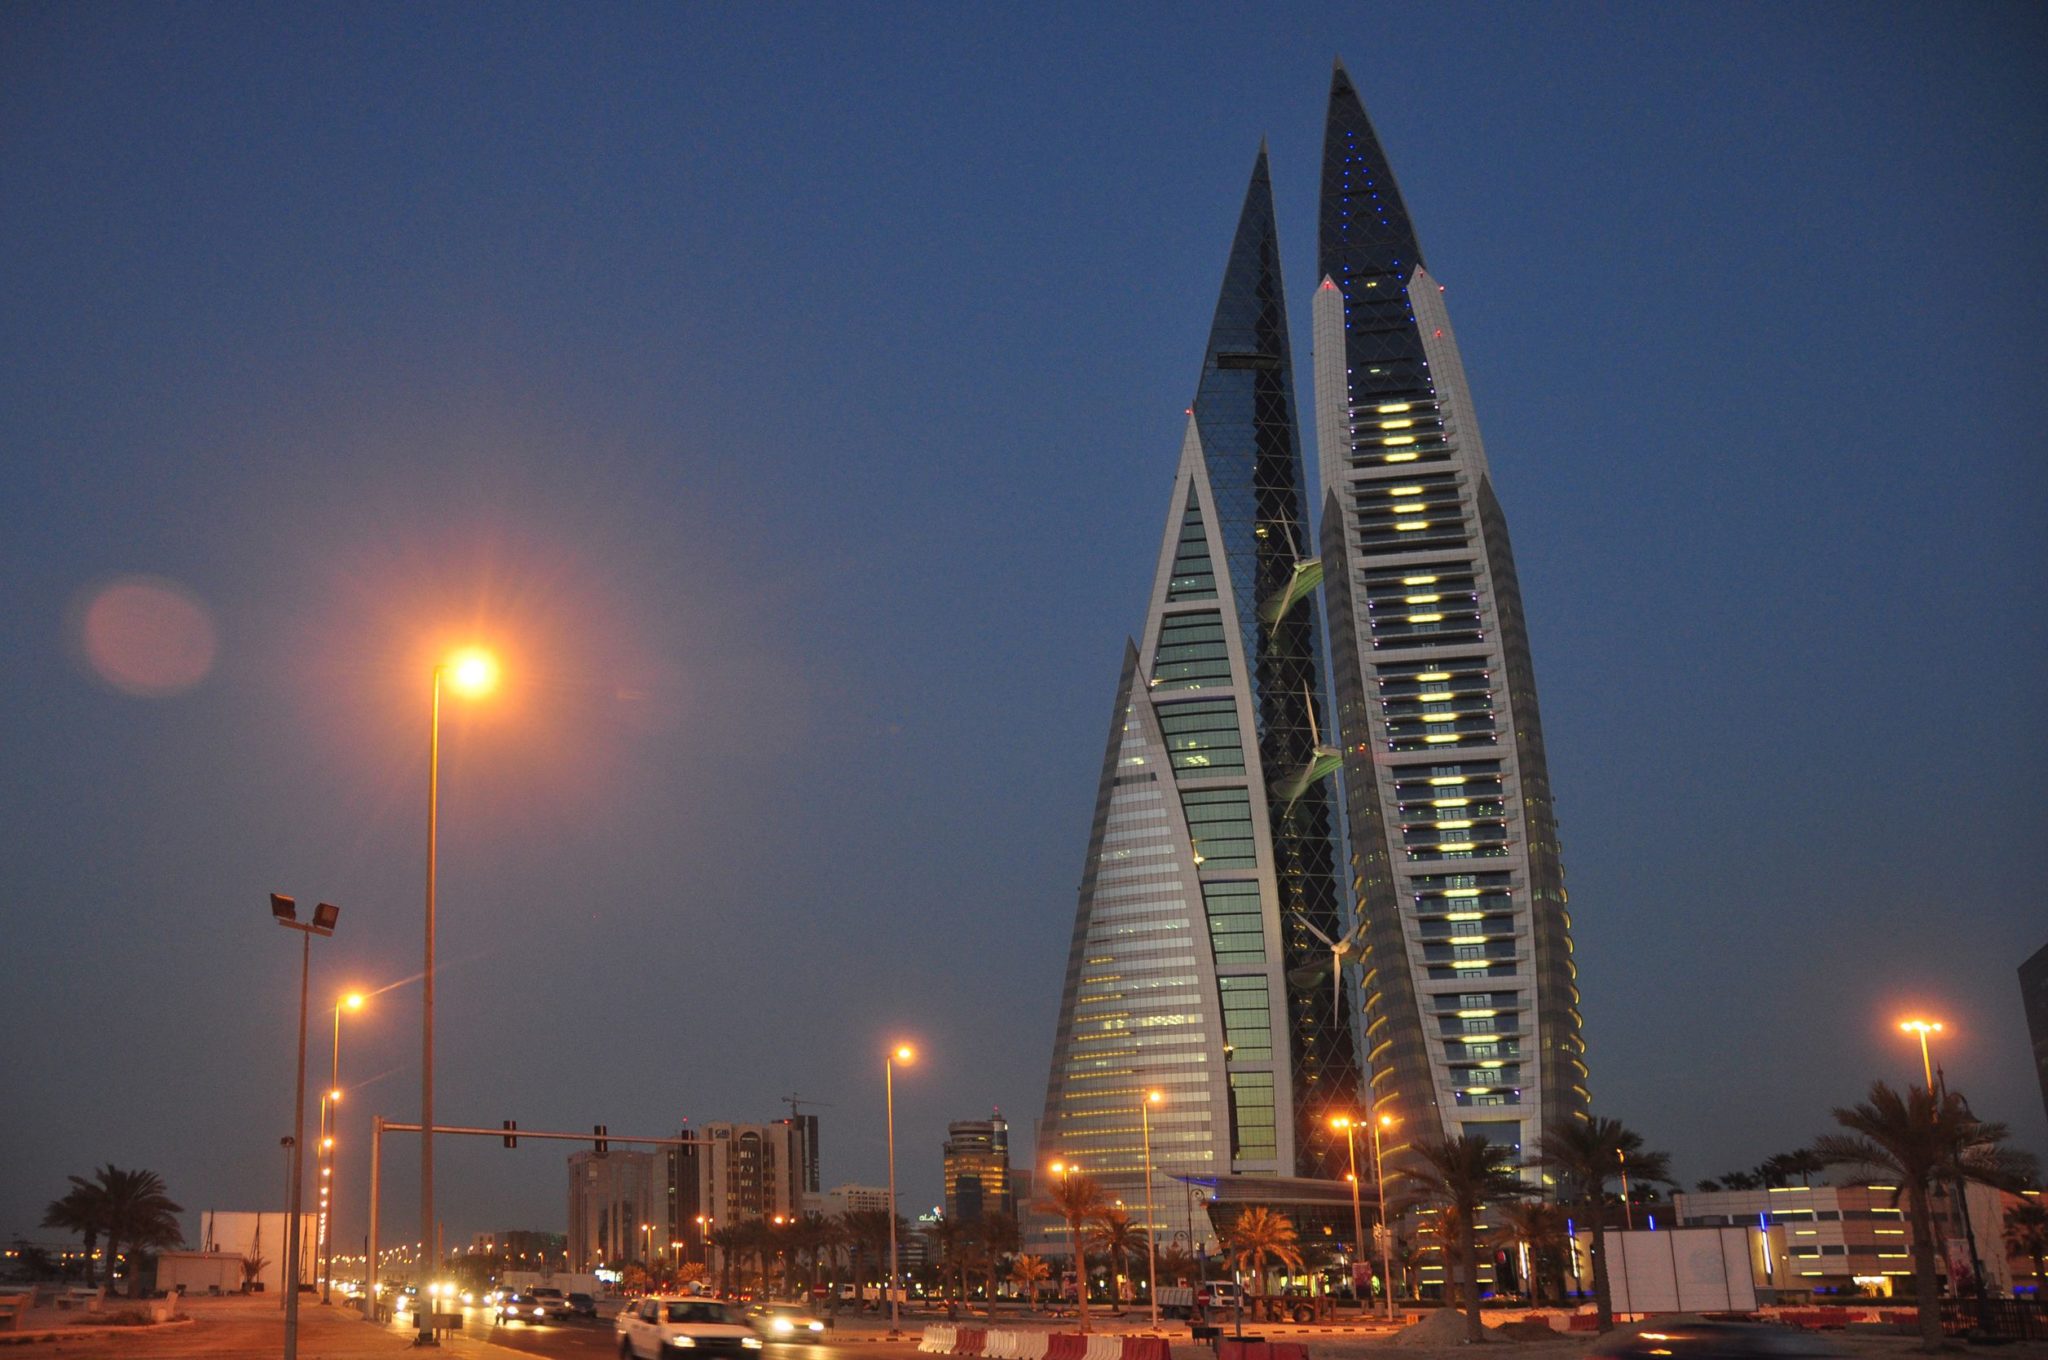 How One Day In Bahrain Made This Traveler View the Middle East Differently﻿